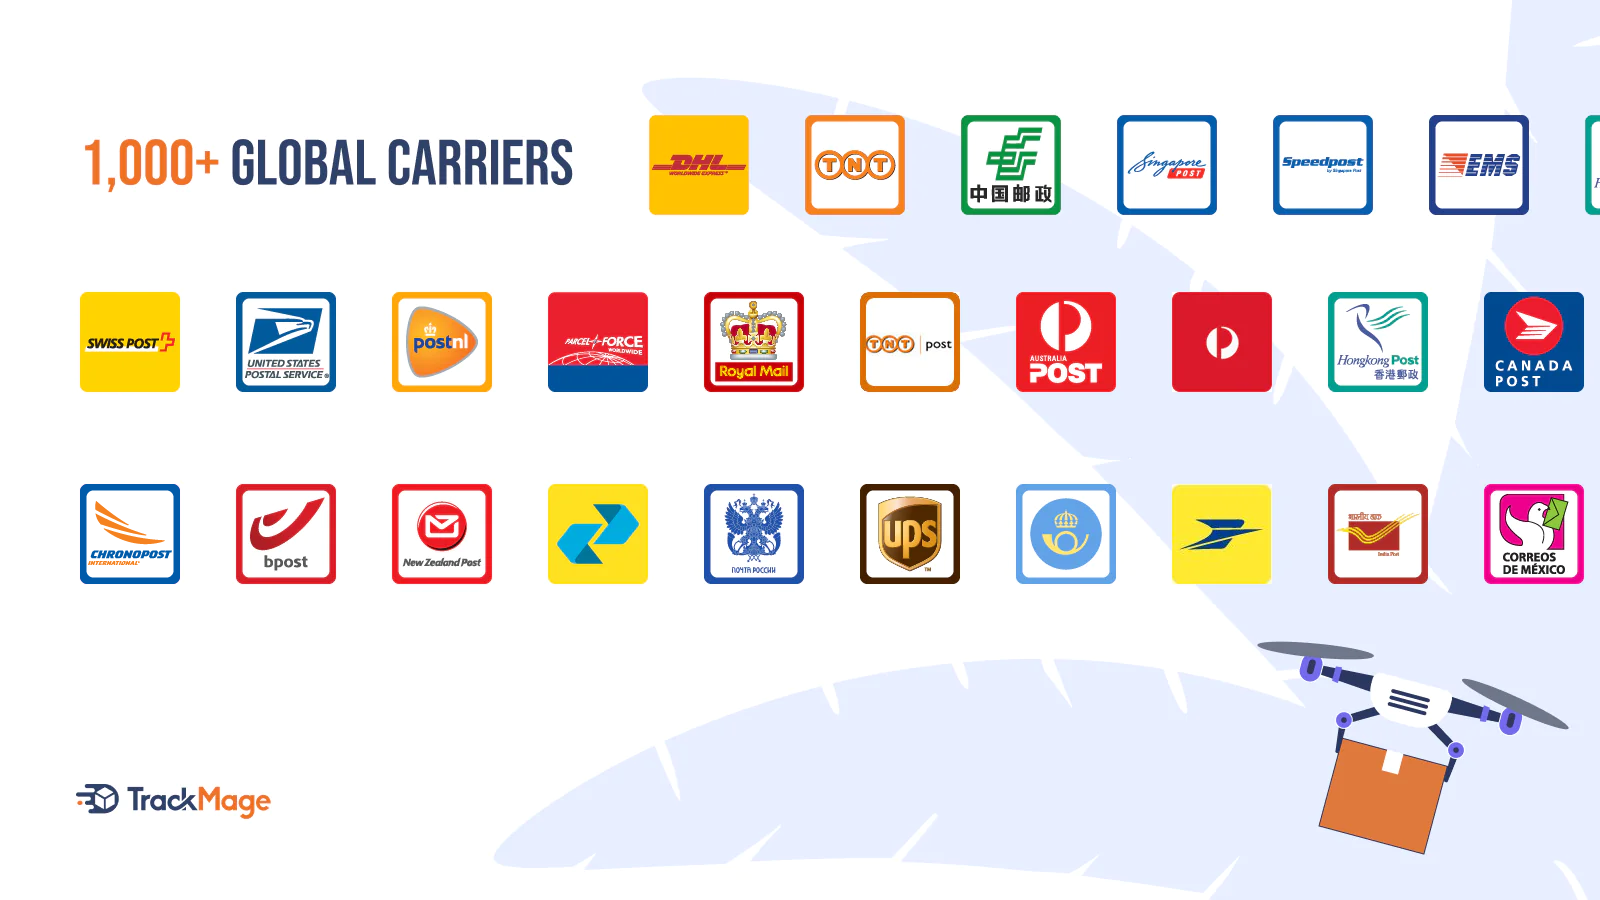 1,000+ Global Carriers